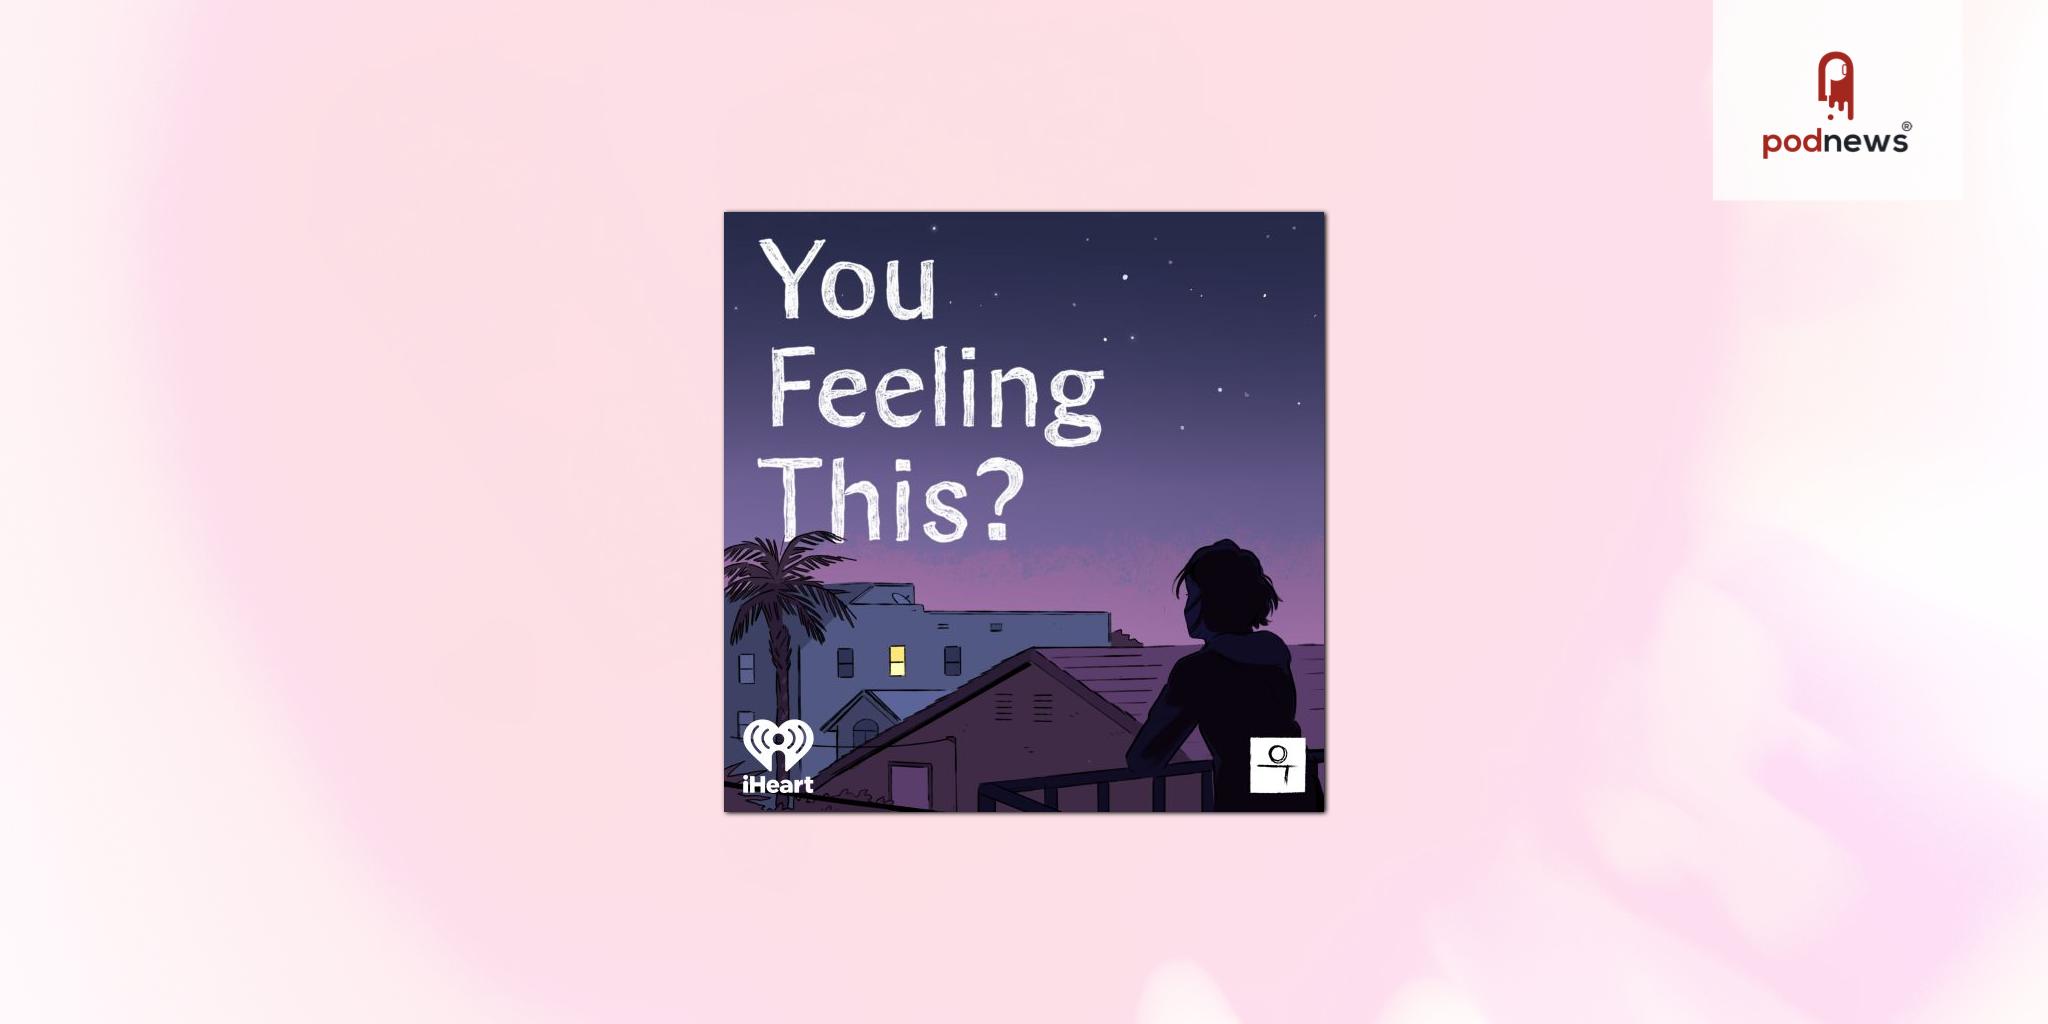 “You Feeling This?” A Fiction Podcast Mixtape About Love Showcases the Hearts and Sounds of L.A.